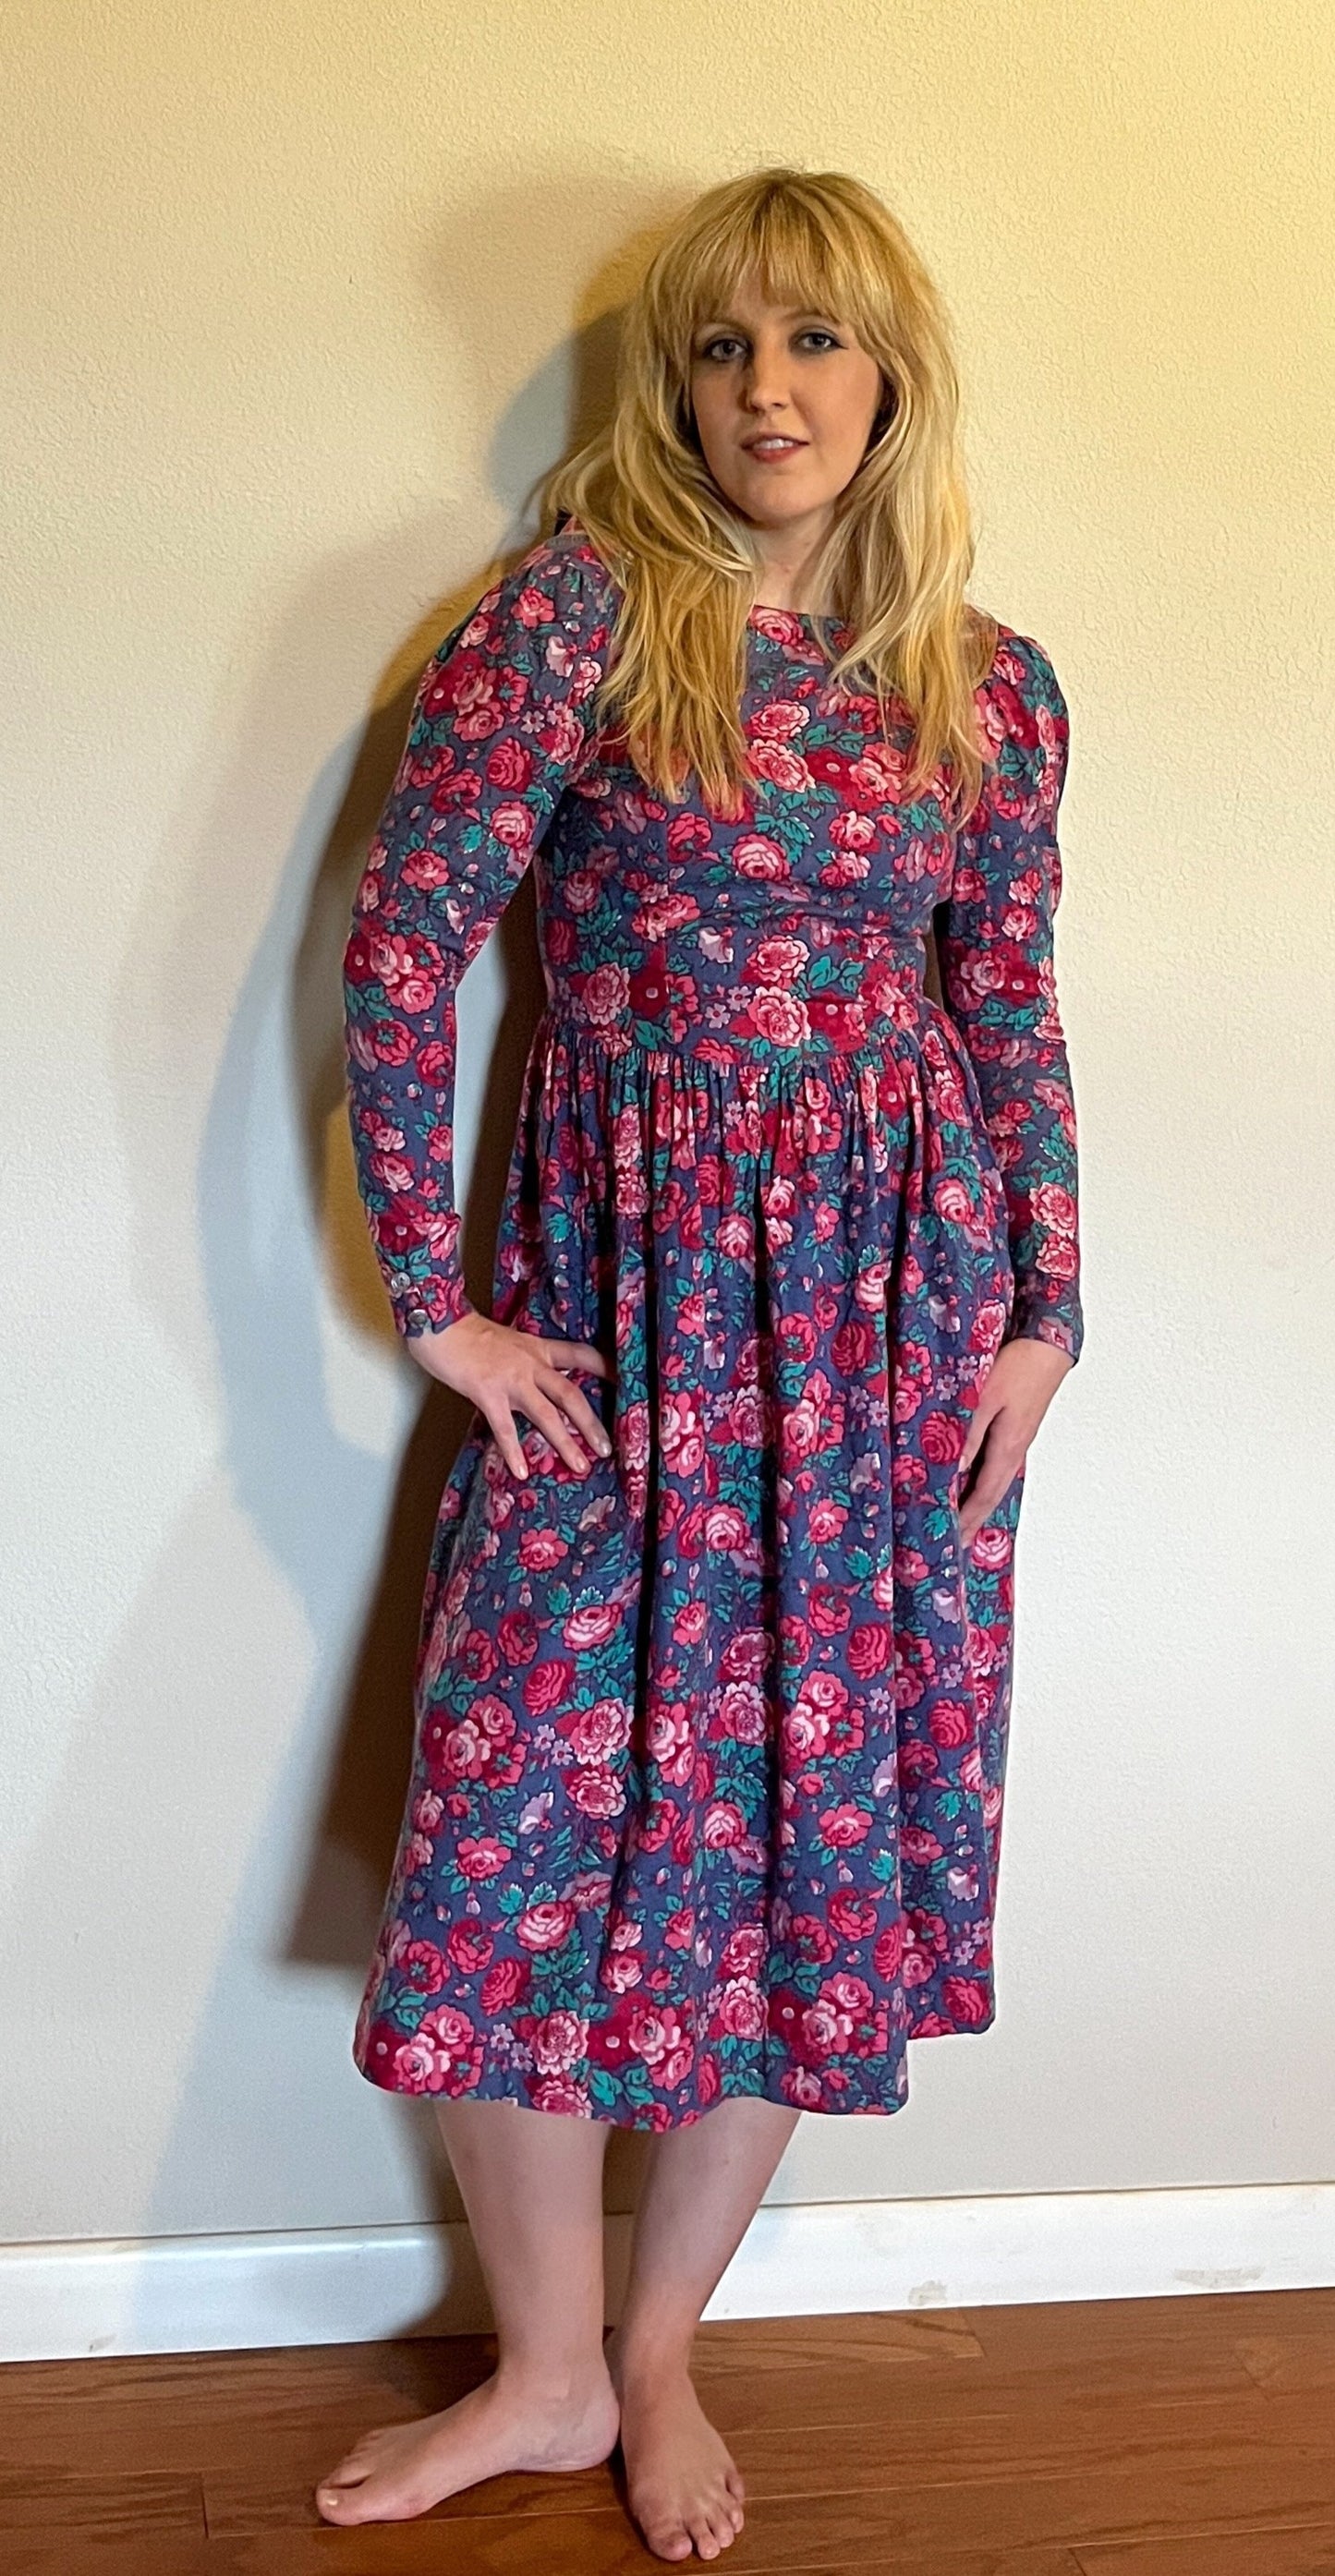 Vintage 1980's "Laura Ashley" Pink & Red Floral Long Sleeve Dress